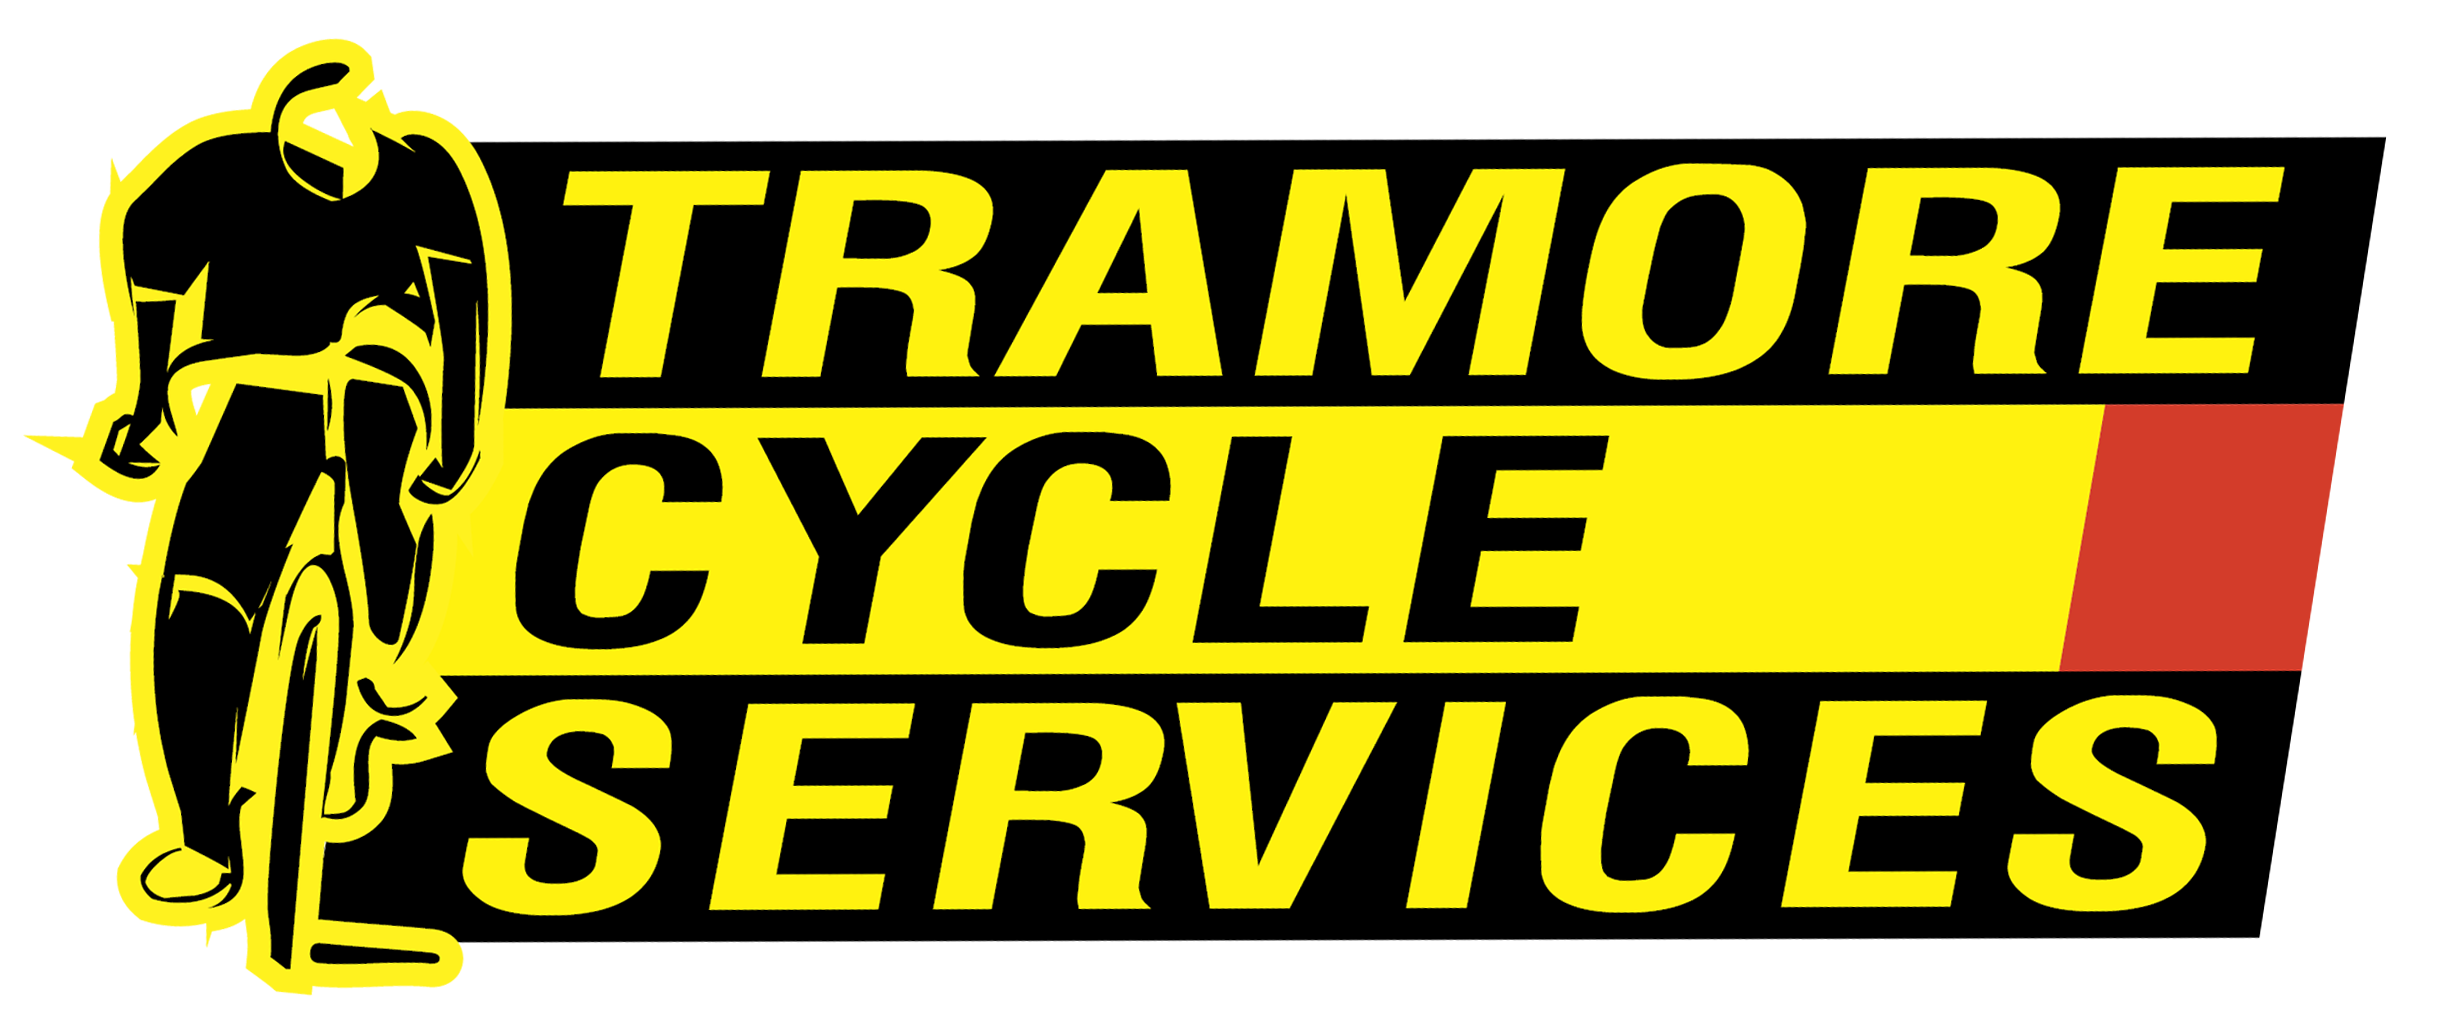 Tramore Cycle Services